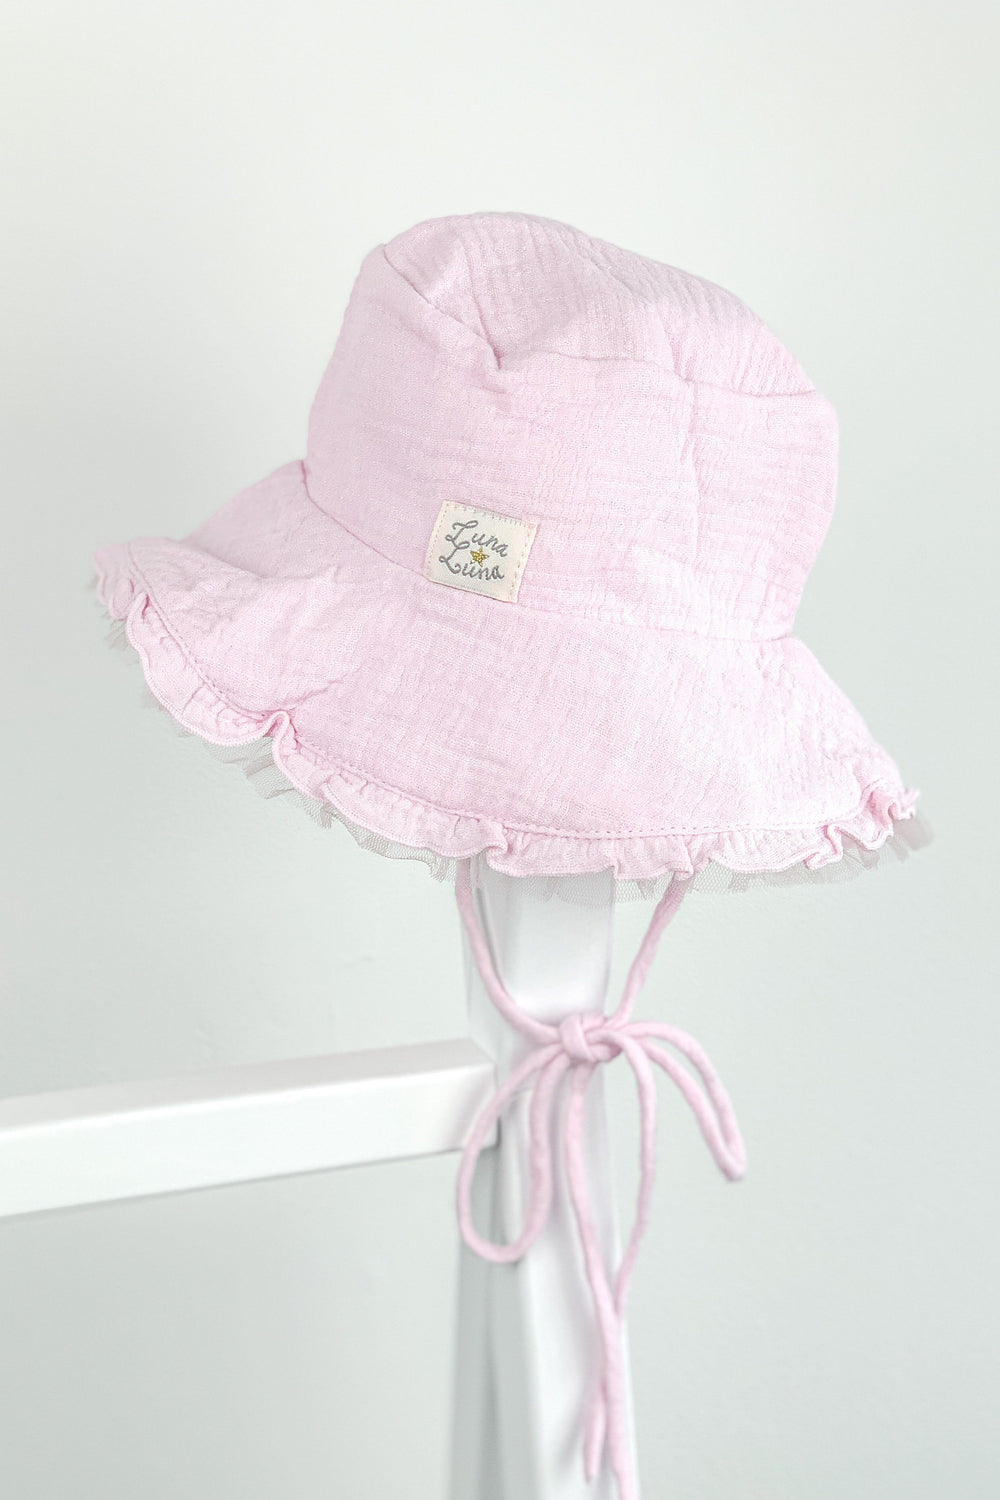 Luna Luna "Cleo" Cheesecloth Tulle Sun Hat | Millie and John